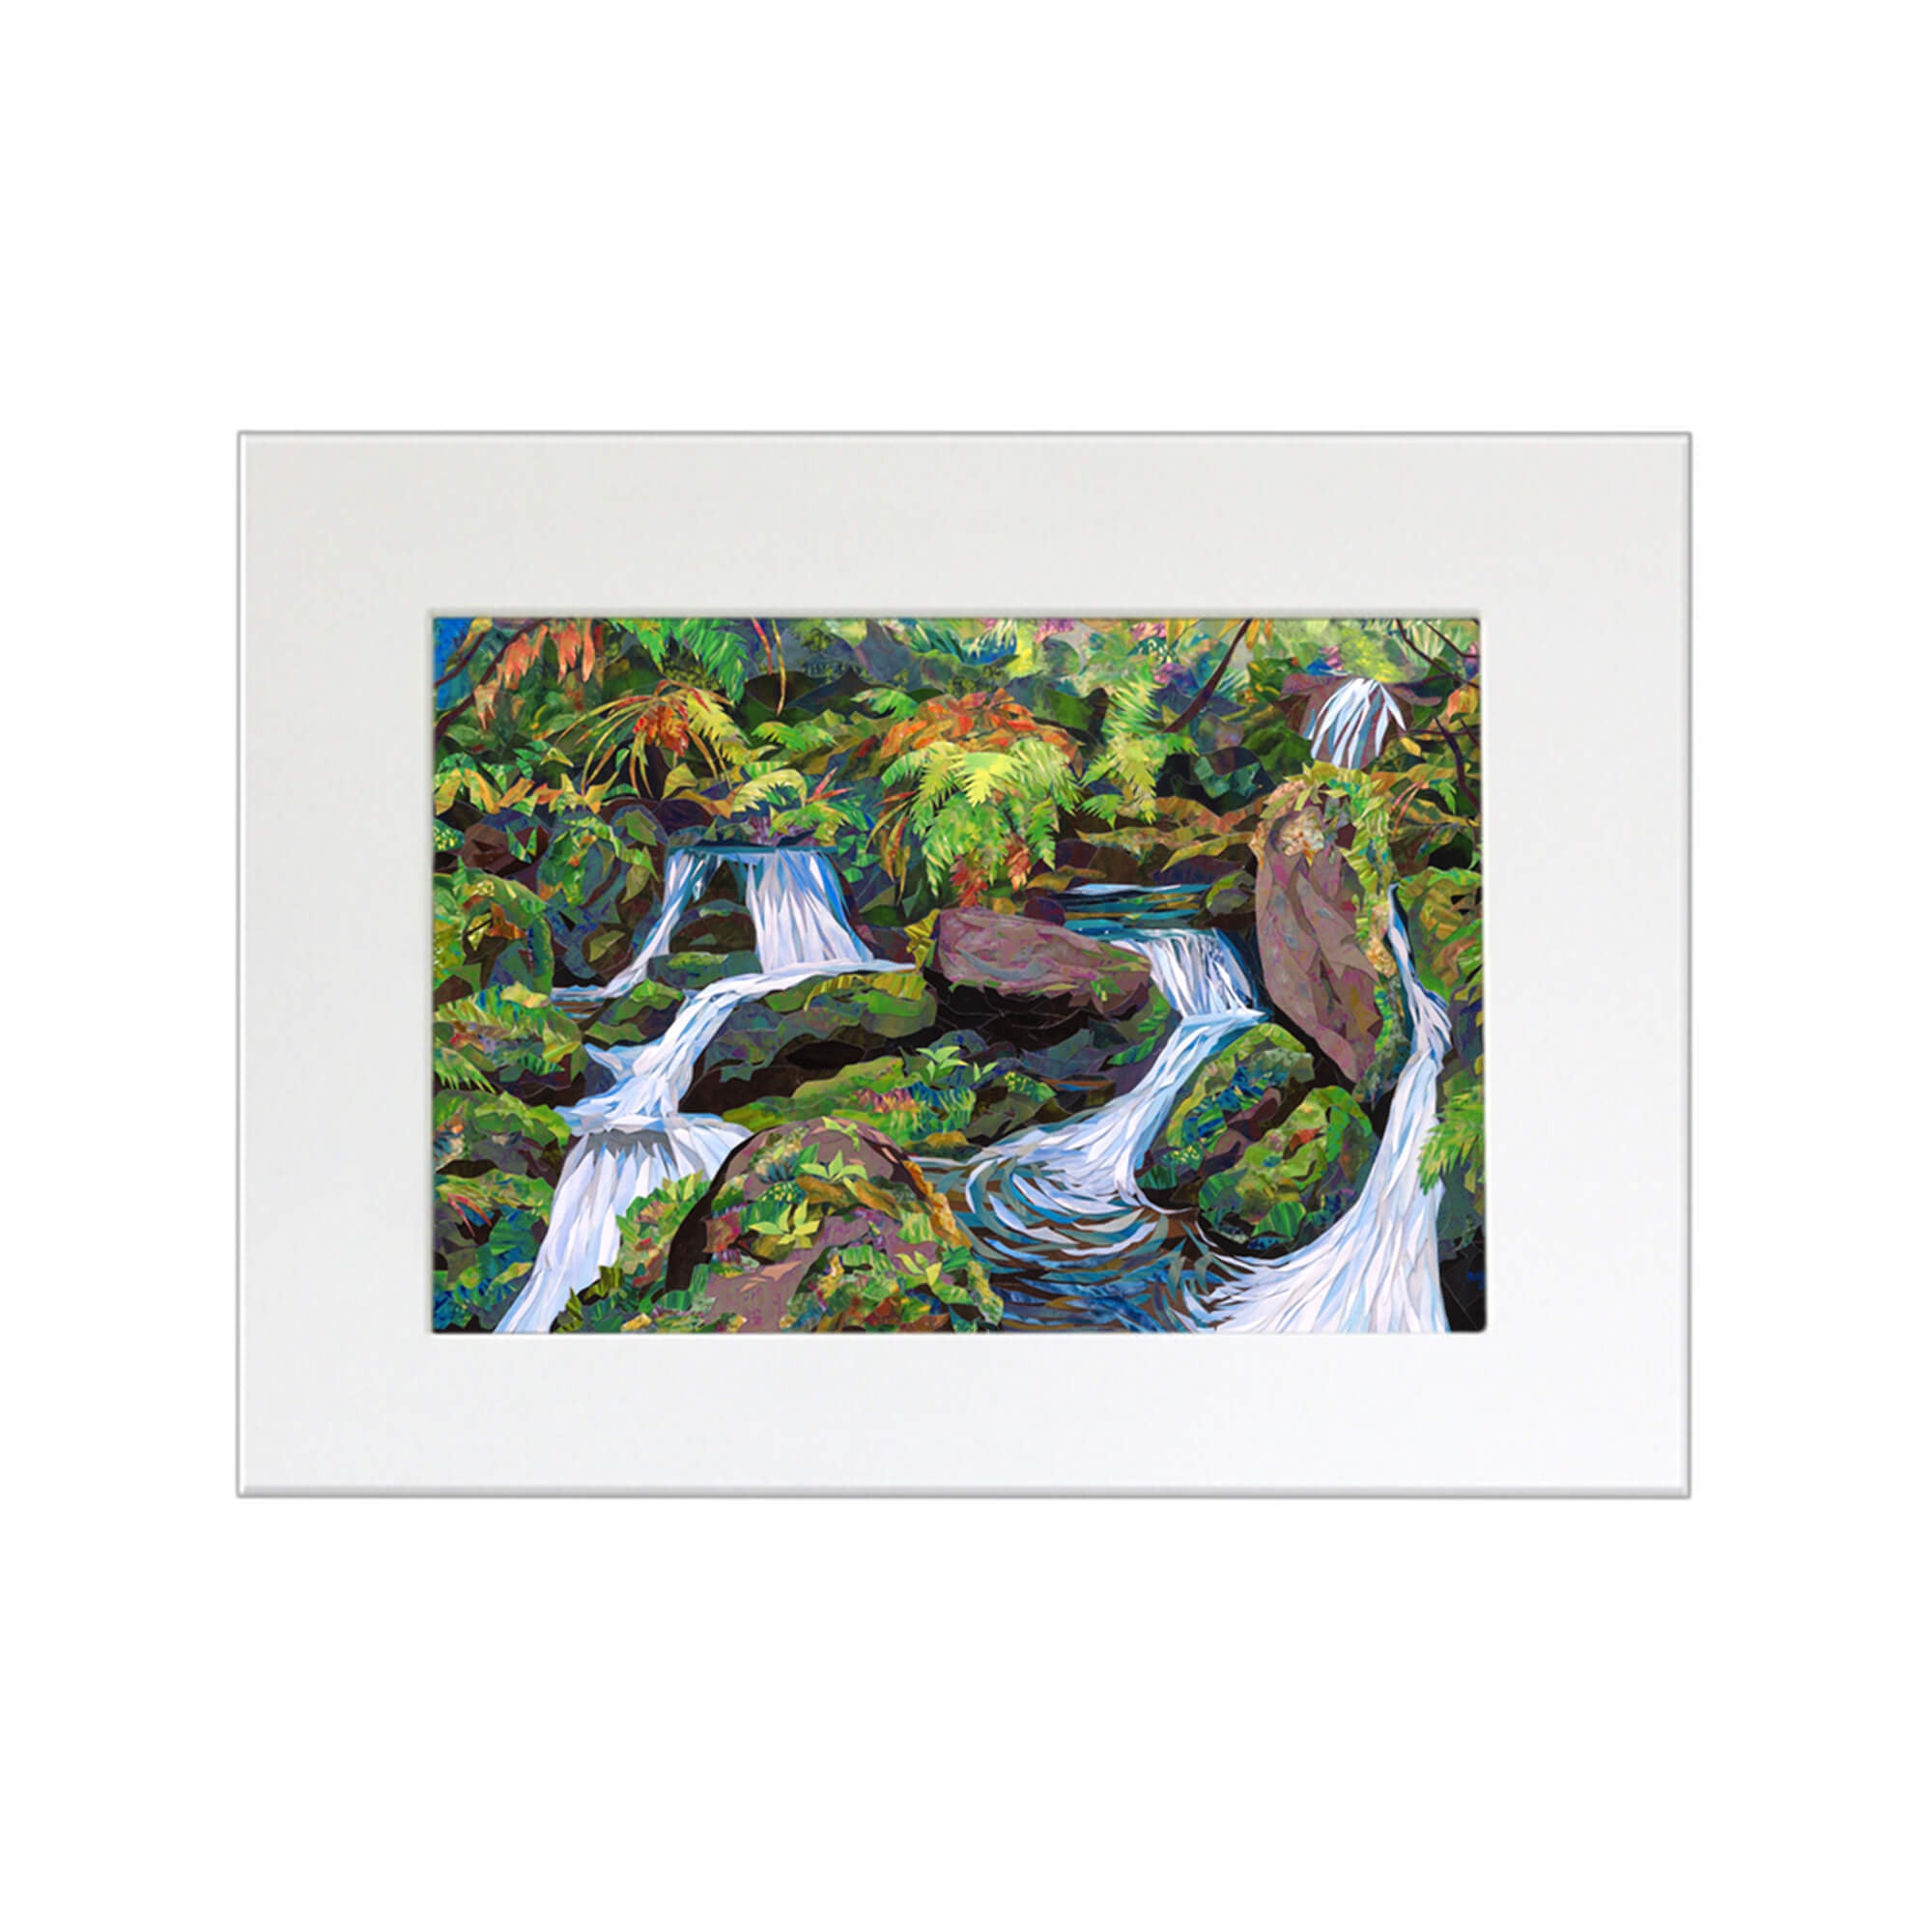 A matted art print featuring a collage of colorful streams of water surrounded by tropical plants by Hawaii artist Patrick Parker